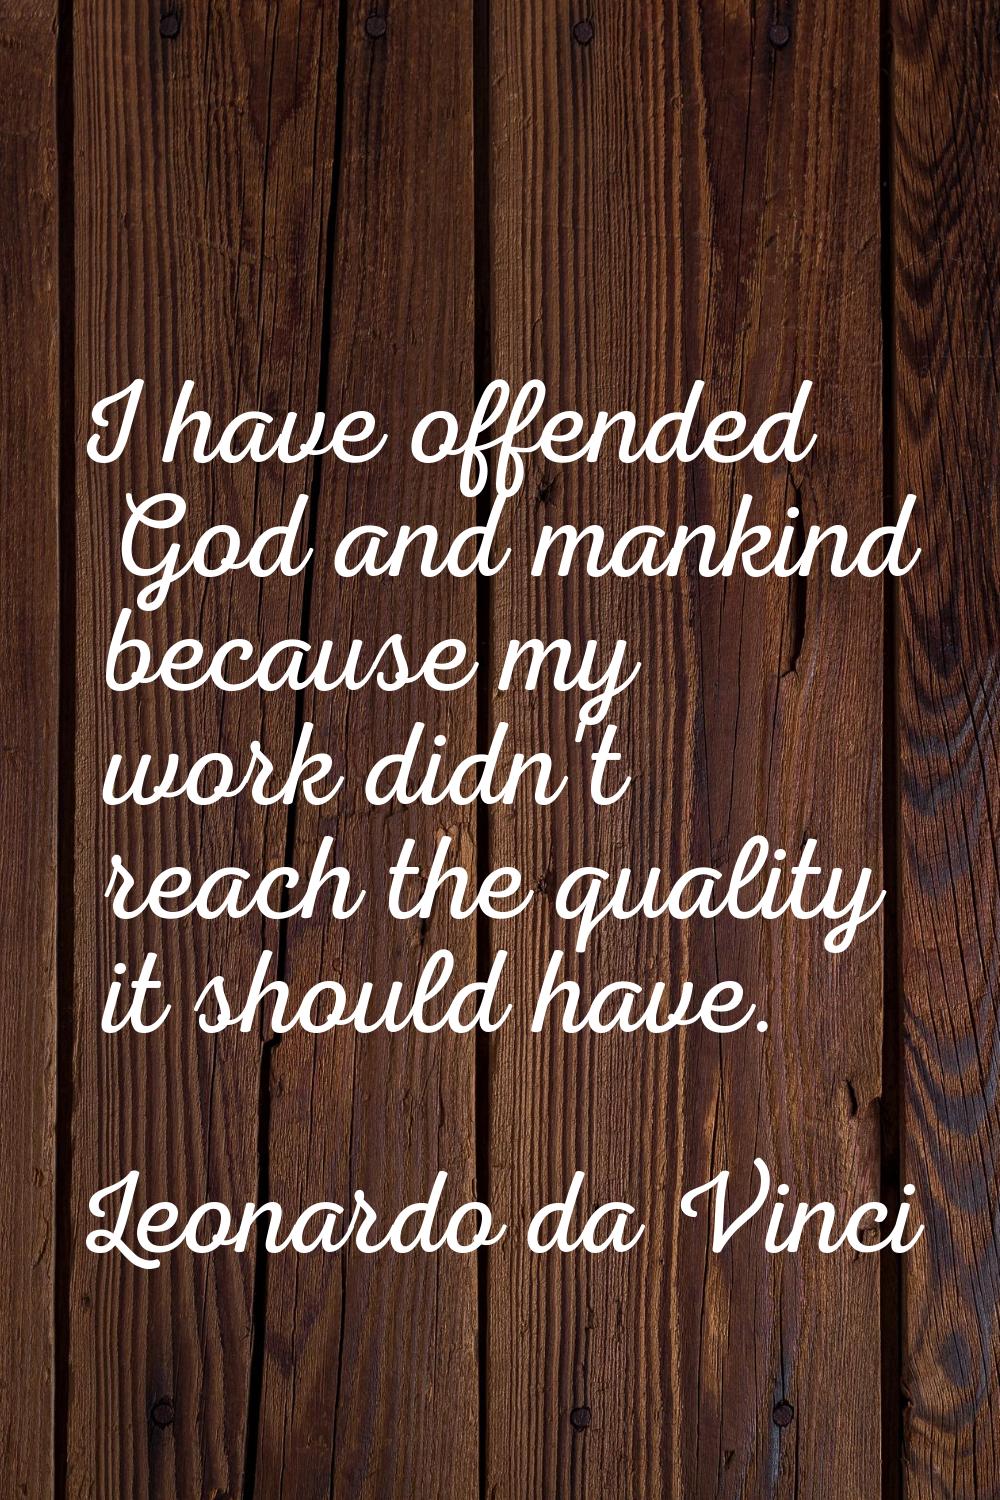 I have offended God and mankind because my work didn't reach the quality it should have.